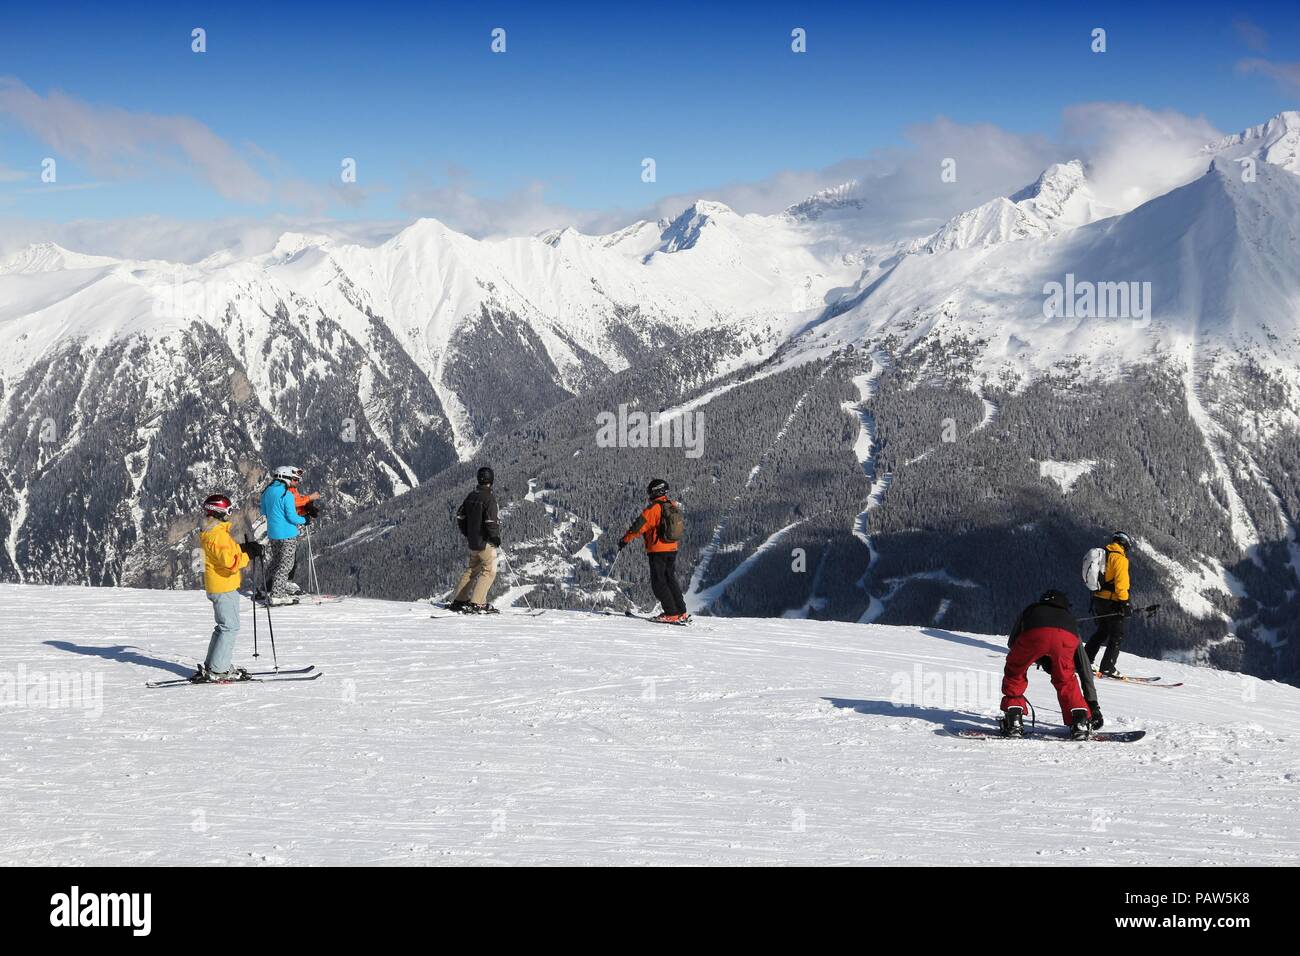 BAD GASTEIN, AUSTRIA - MARCH 9, 2016: People ski in Bad Gastein. It is part of Ski Amade, one of largest ski regions in Europe with 760km of ski runs. Stock Photo